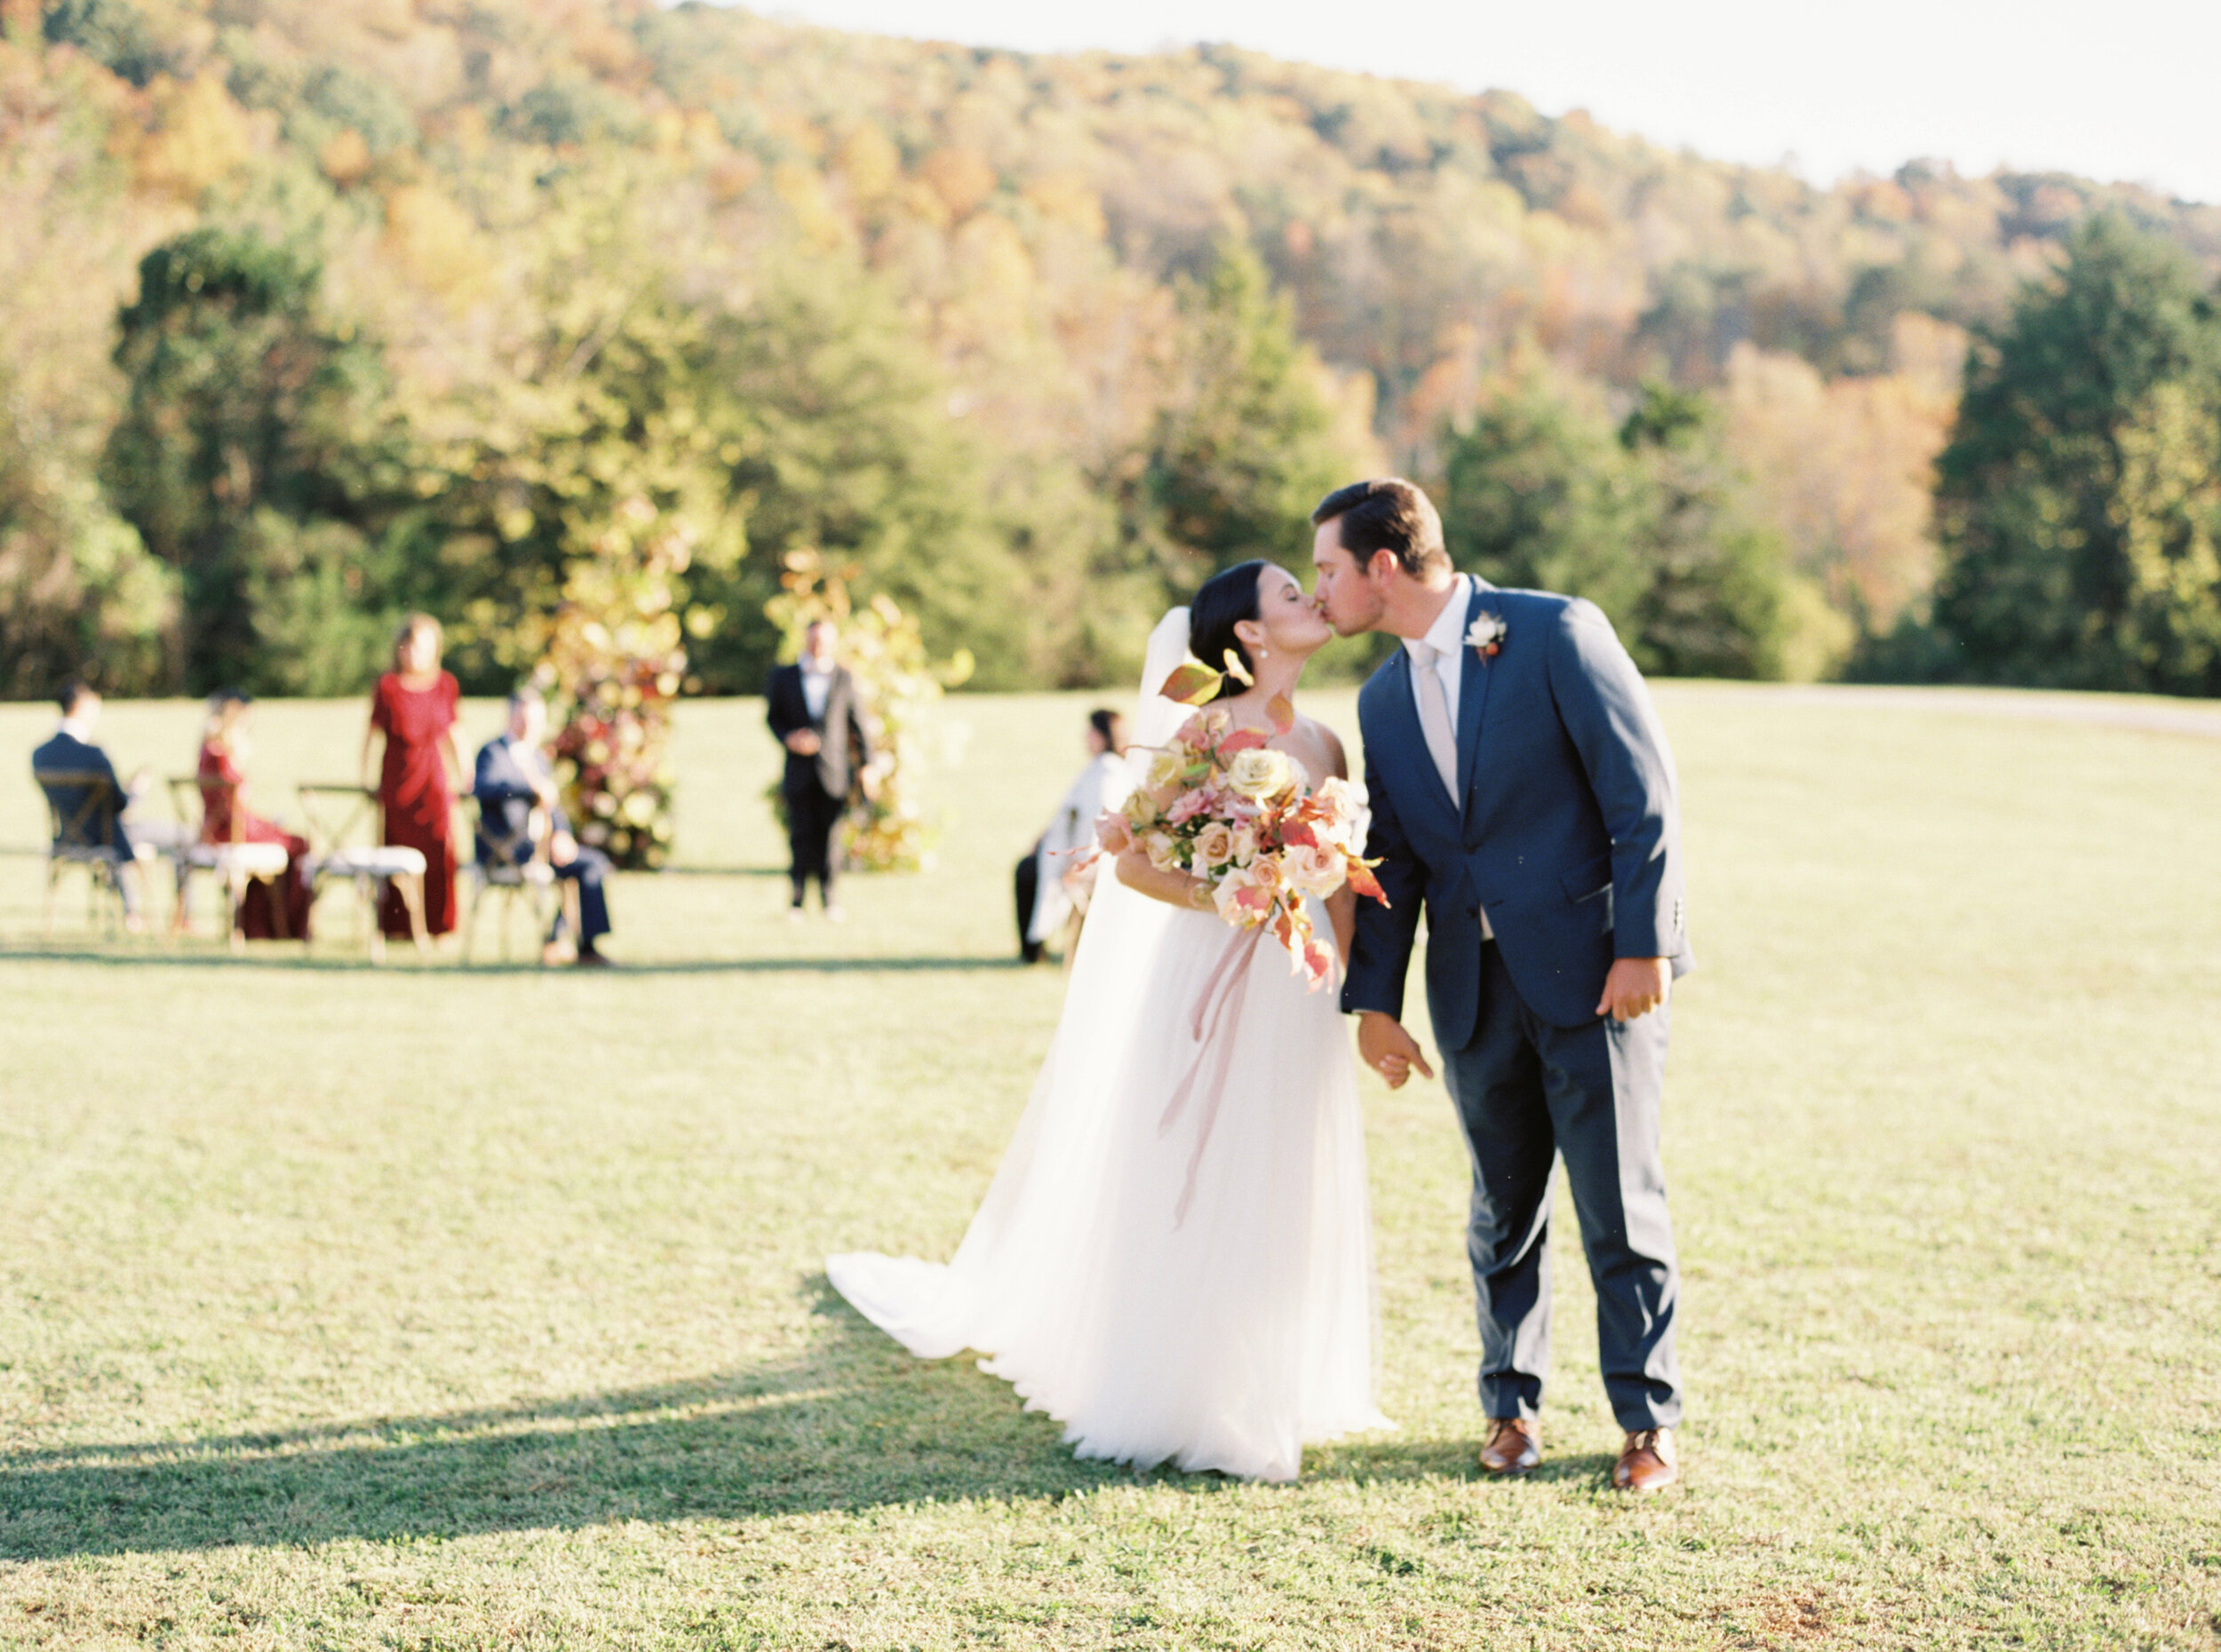 Morgan_Riley_Wedding_Tennessee_Farmhouse_KNoxville_Abigail_Malone_Photography-296.jpg